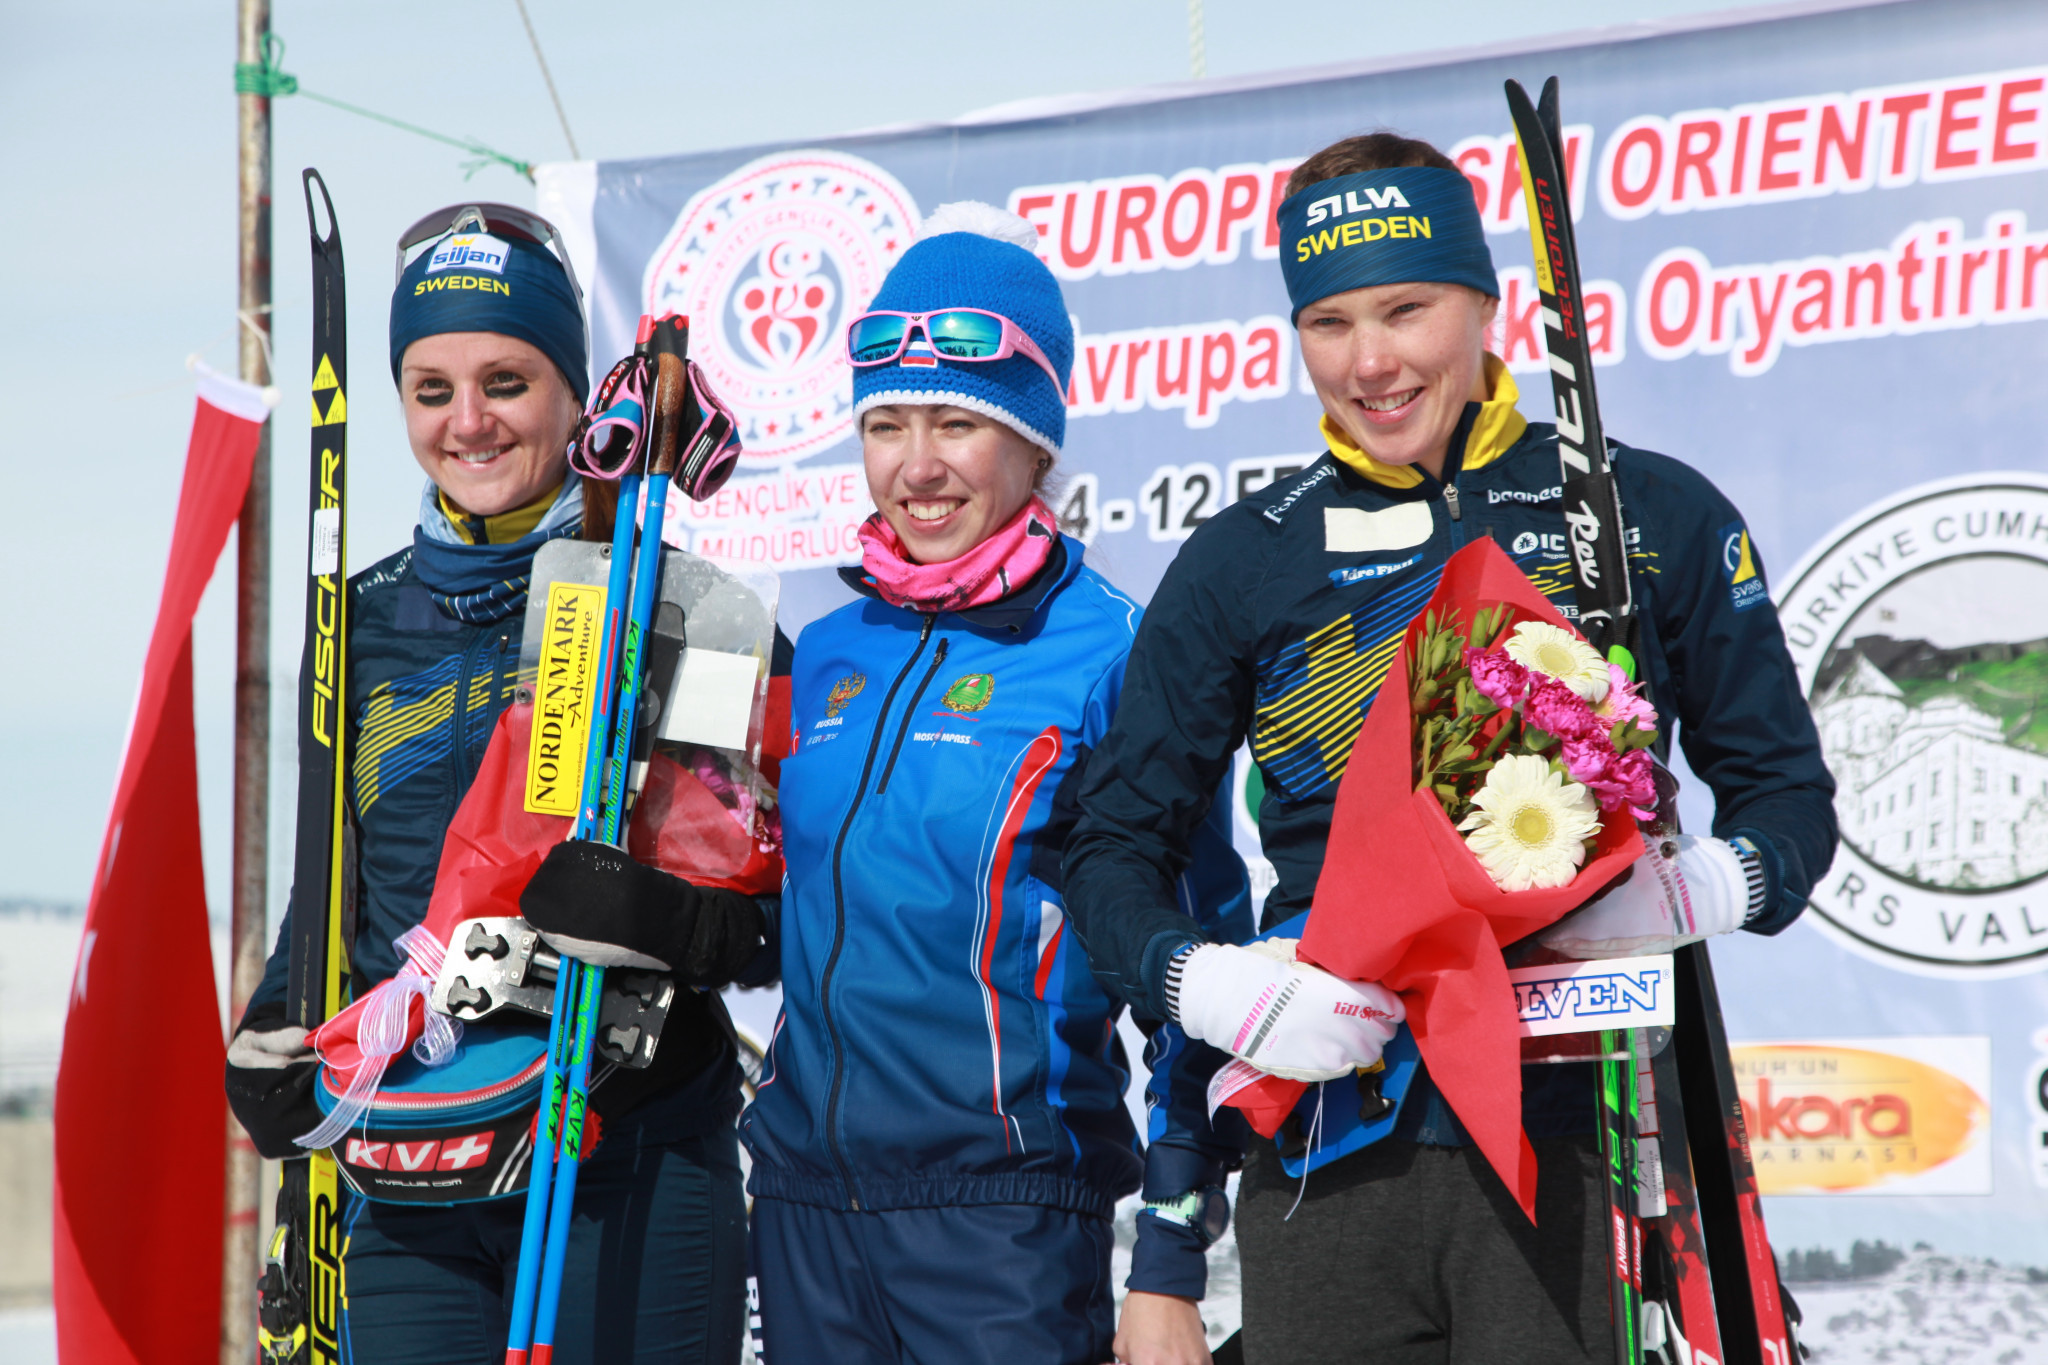 Sweden's Magdalena Olsson, centre, won the women's middle distance race ©IOF